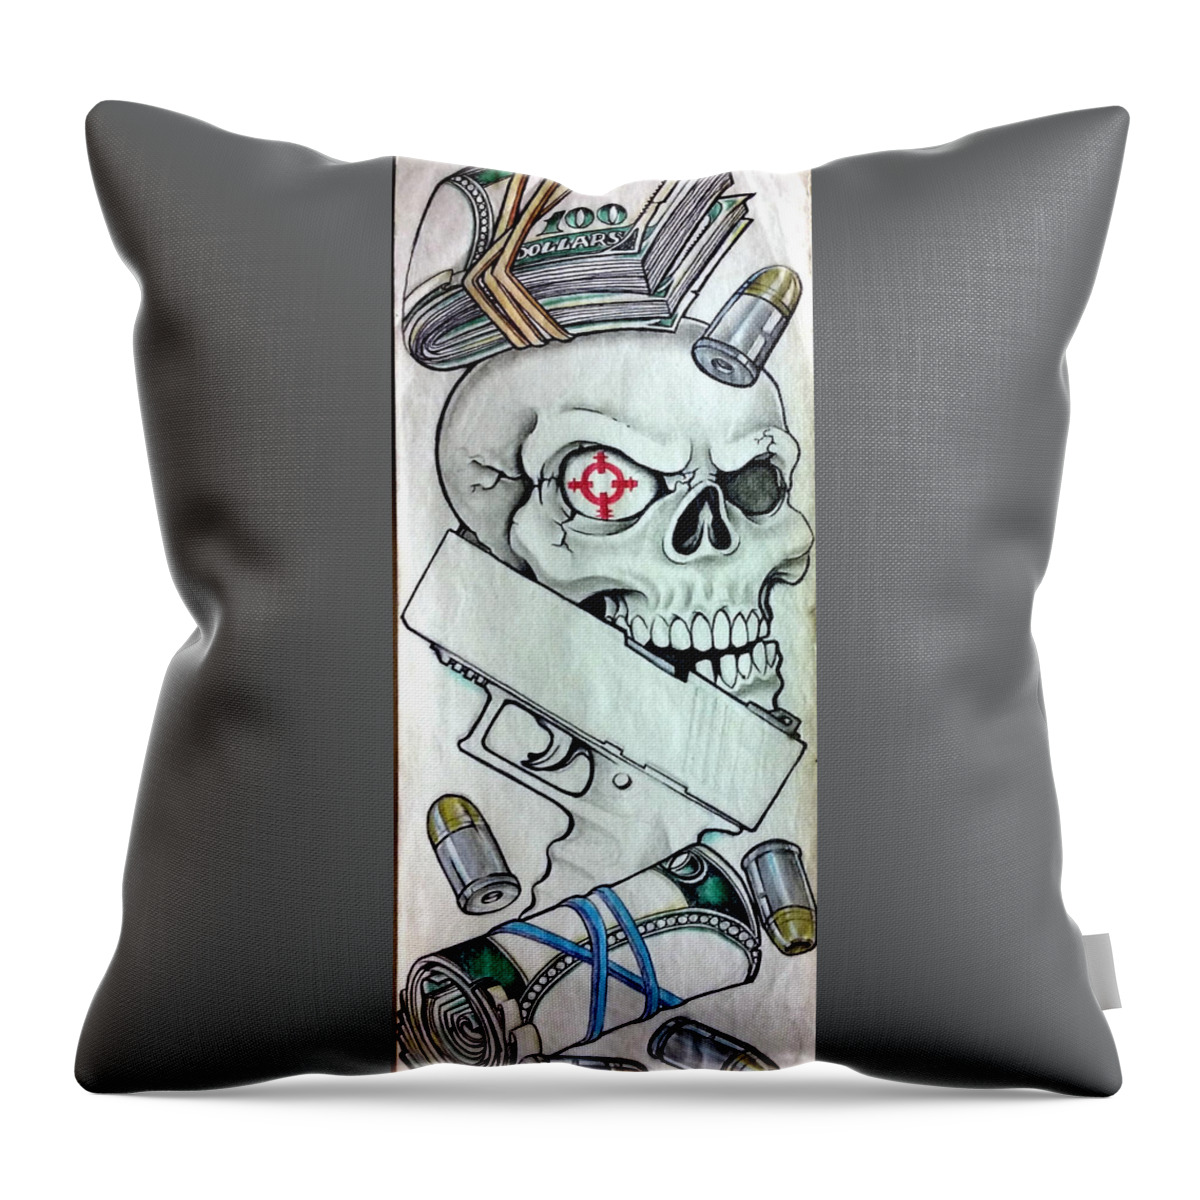 Black Art Throw Pillow featuring the drawing Untitled #3 by Arnold Citizen aka Musafir